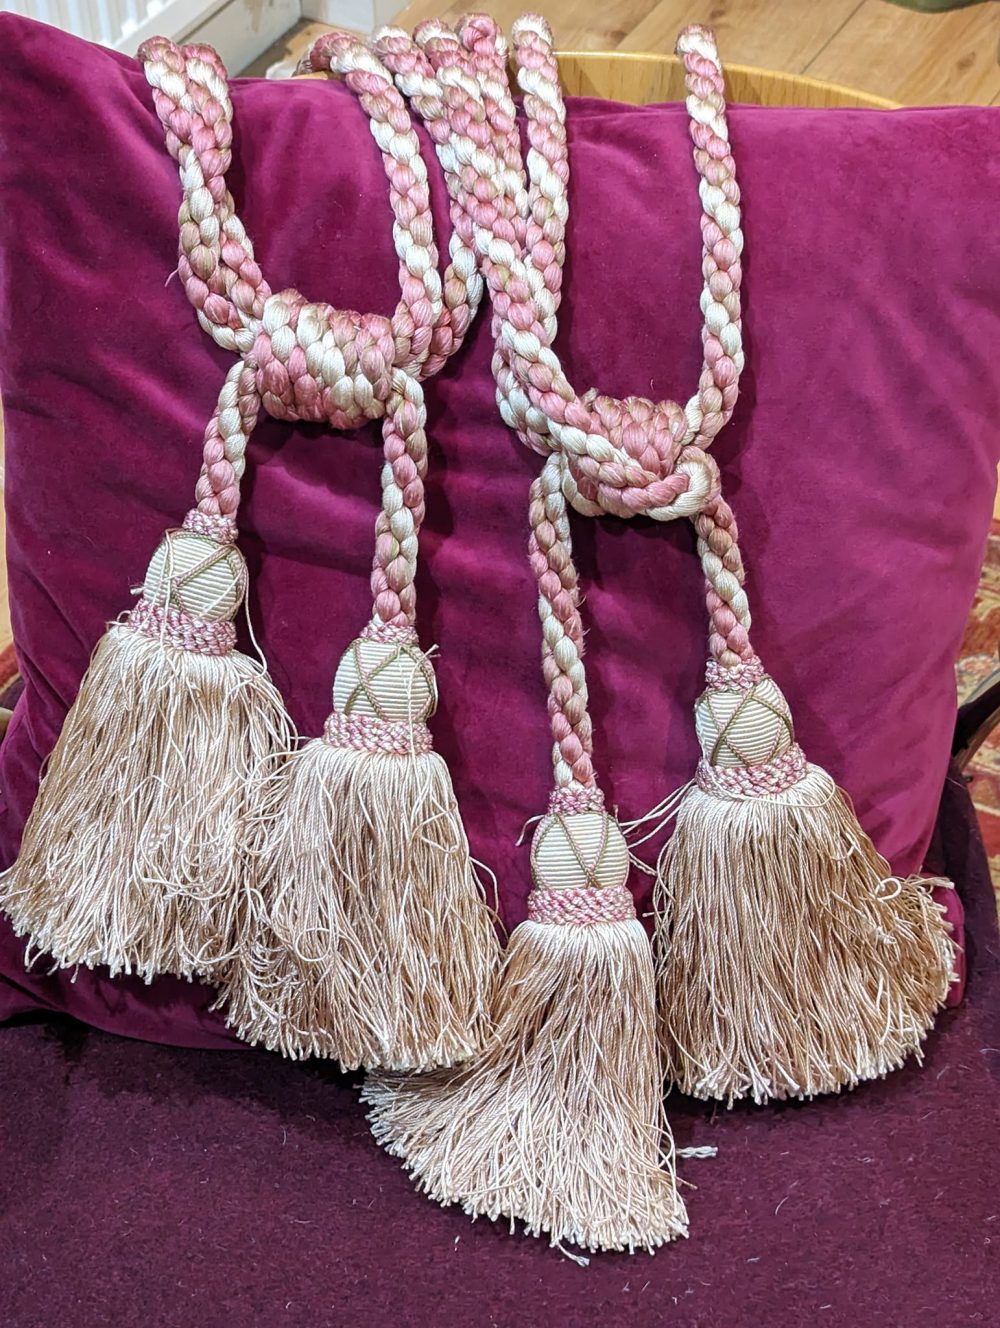 Pink White and Cream Rope & Tassel Double-Headed Tie-Backs